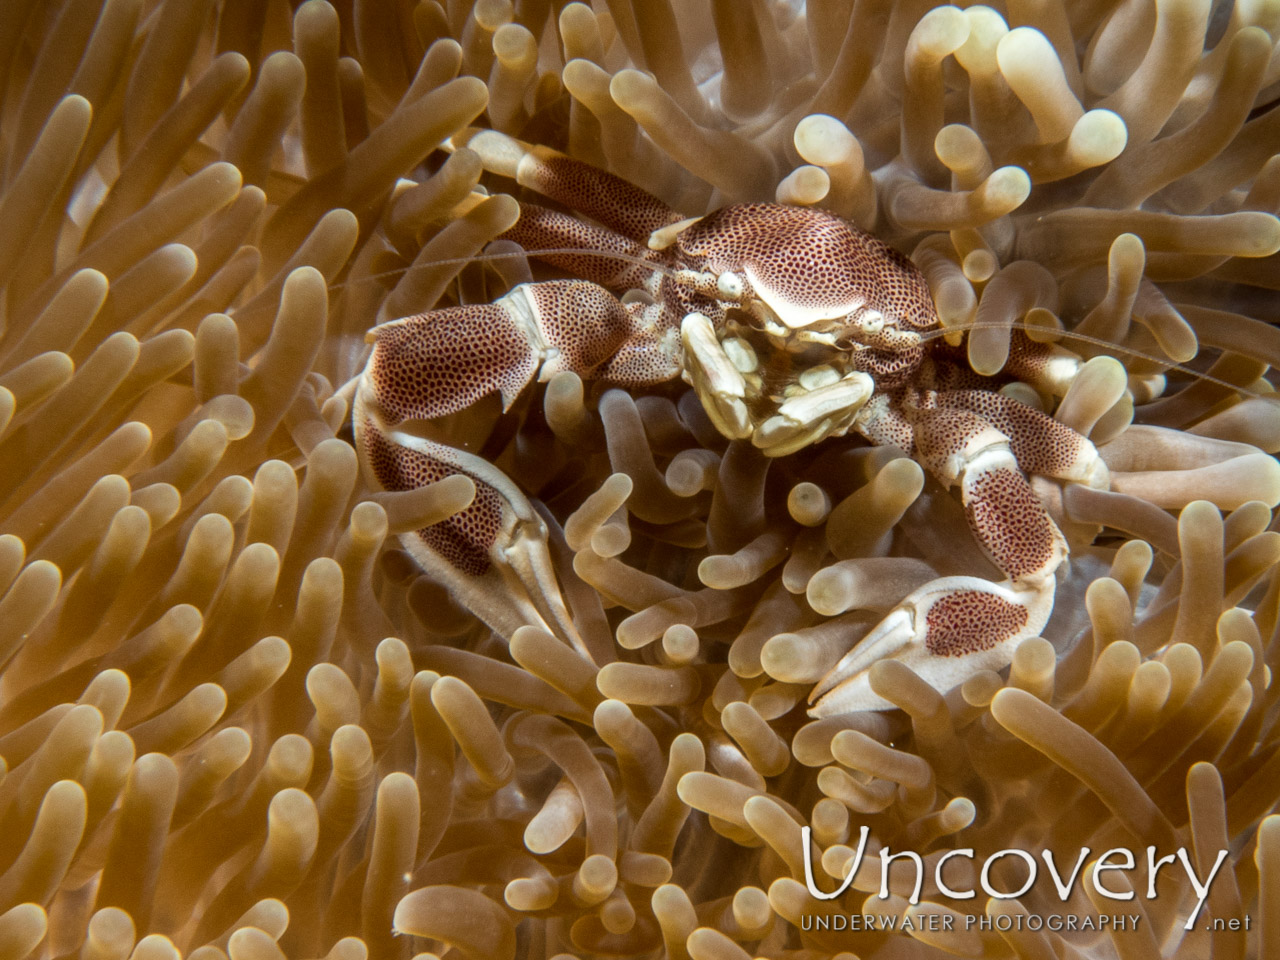 Spotted Porcelain Crab (neopetrolisthes Maculatus), photo taken in Maldives, Male Atoll, North Male Atoll, Huduveli